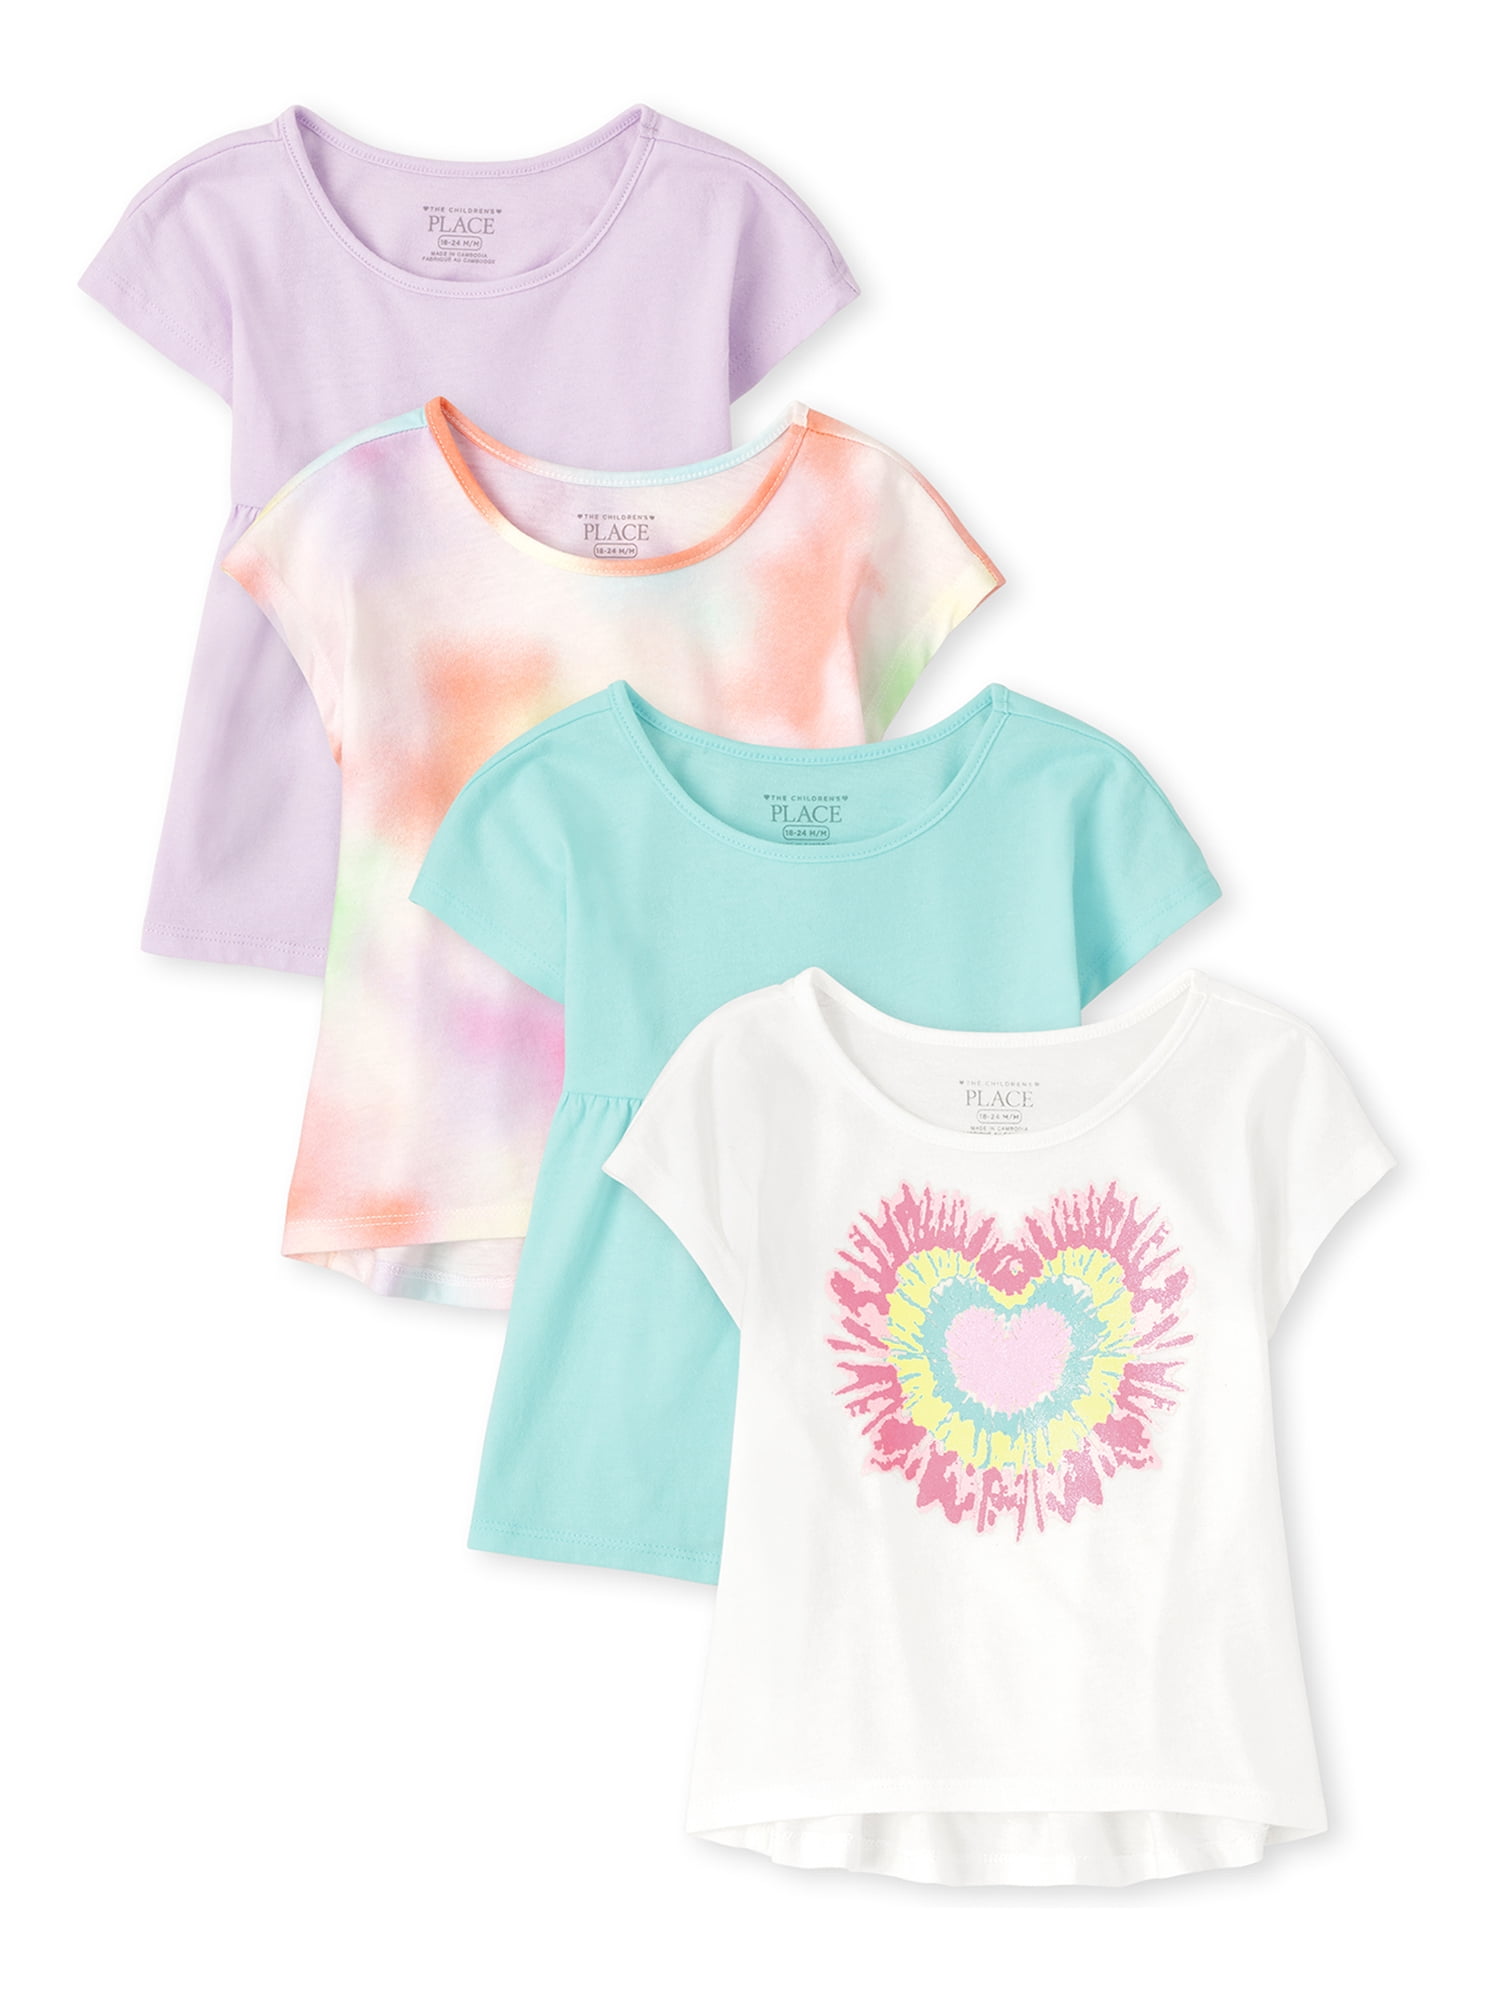 NEW CHILDRENS PLACE GIRLS SIZE 6-9 MONTHS T-SHIRT/TOPS 7 STYLES TO CHOOSE FROM 